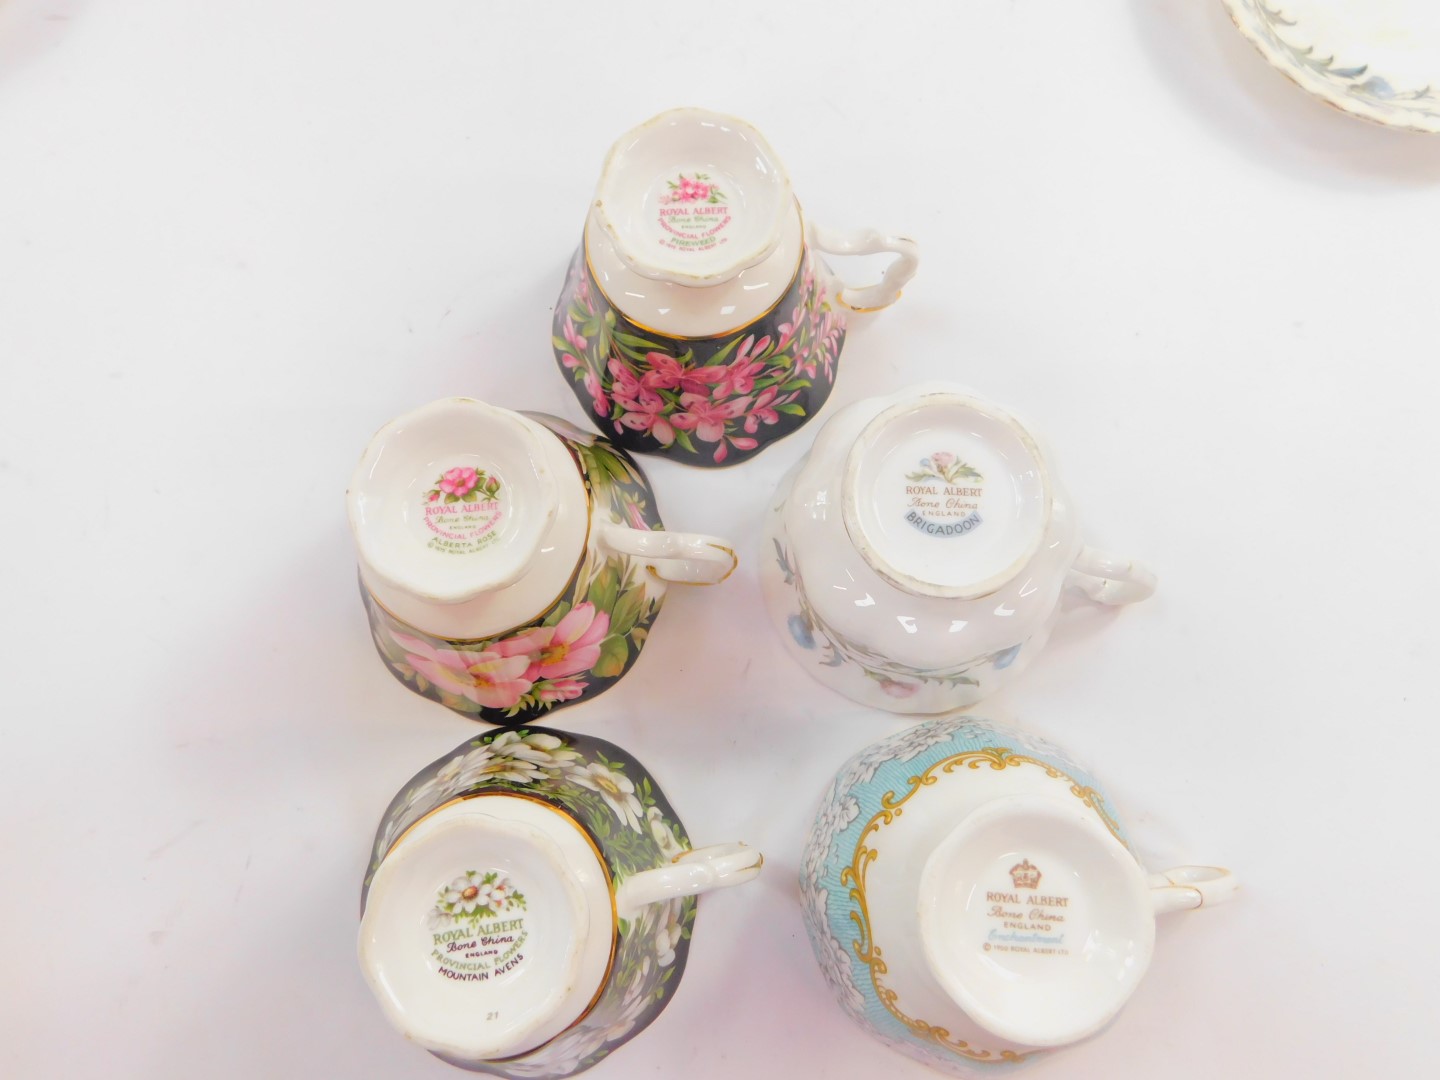 Three Royal Albert porcelain tea cups and saucers, decorated in the Provincial Flowers pattern, comp - Image 2 of 2